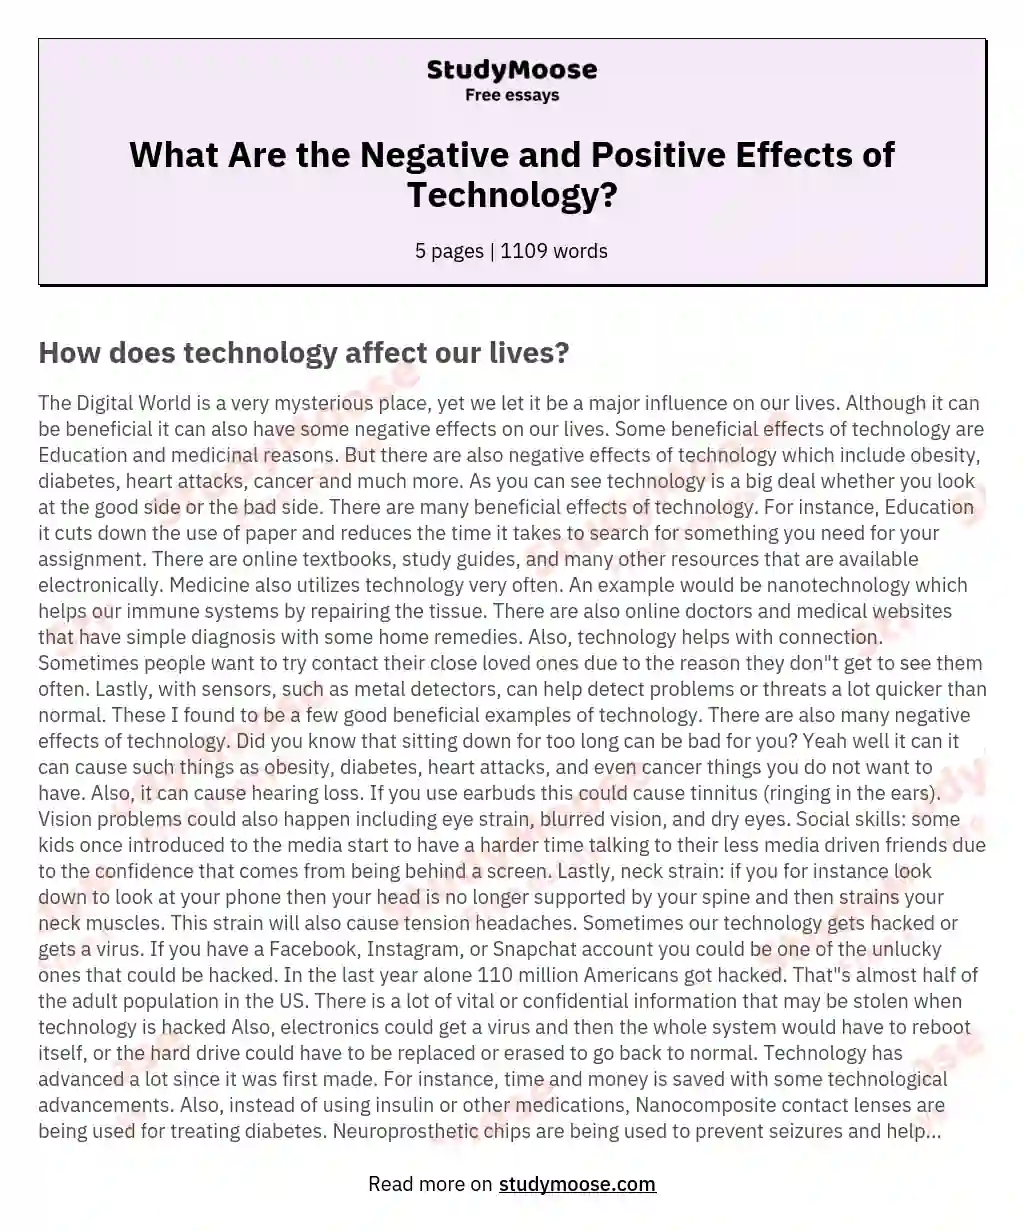 What Are the Negative and Positive Effects of Technology?